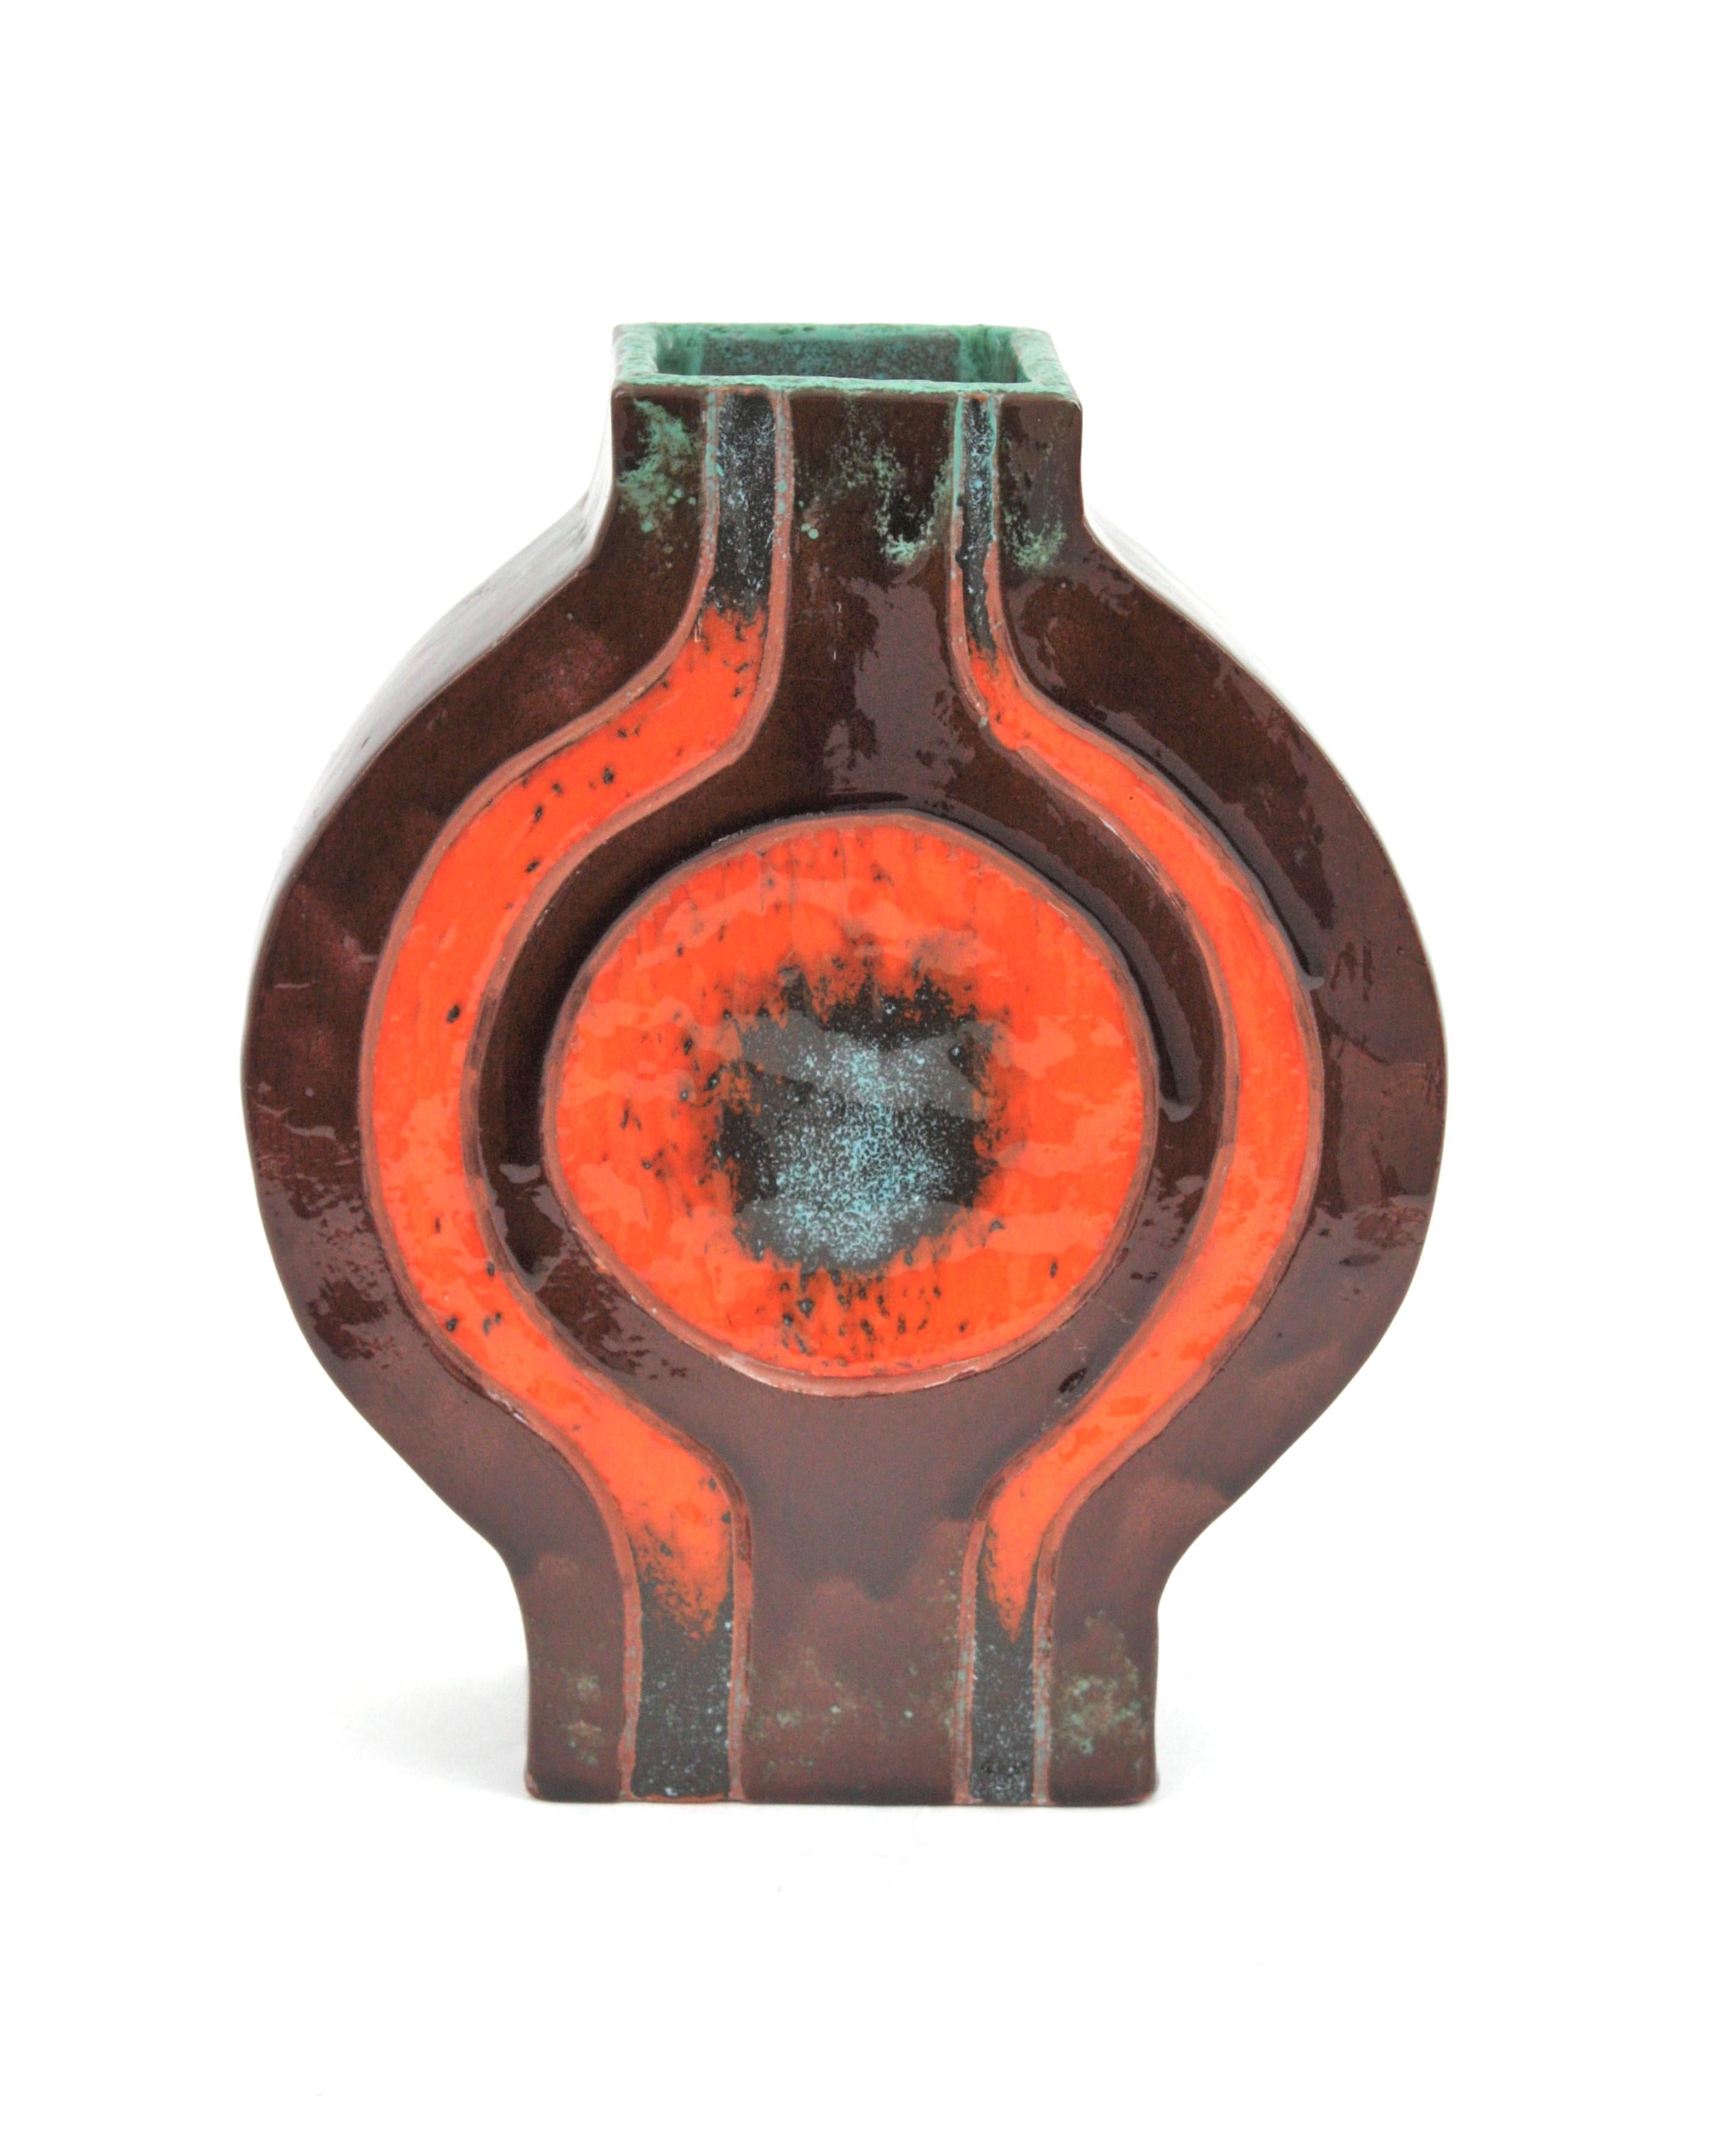 Eye-catching geometric vase in Glazed Ceramic, Spain, 1970s
Orange and Brown Ceramic with Turquoise accents.
To be used as decorative vase, flower vase. Display it alone or as a part of a ceramics collection
Signed underneath
Overall measures: 23,5